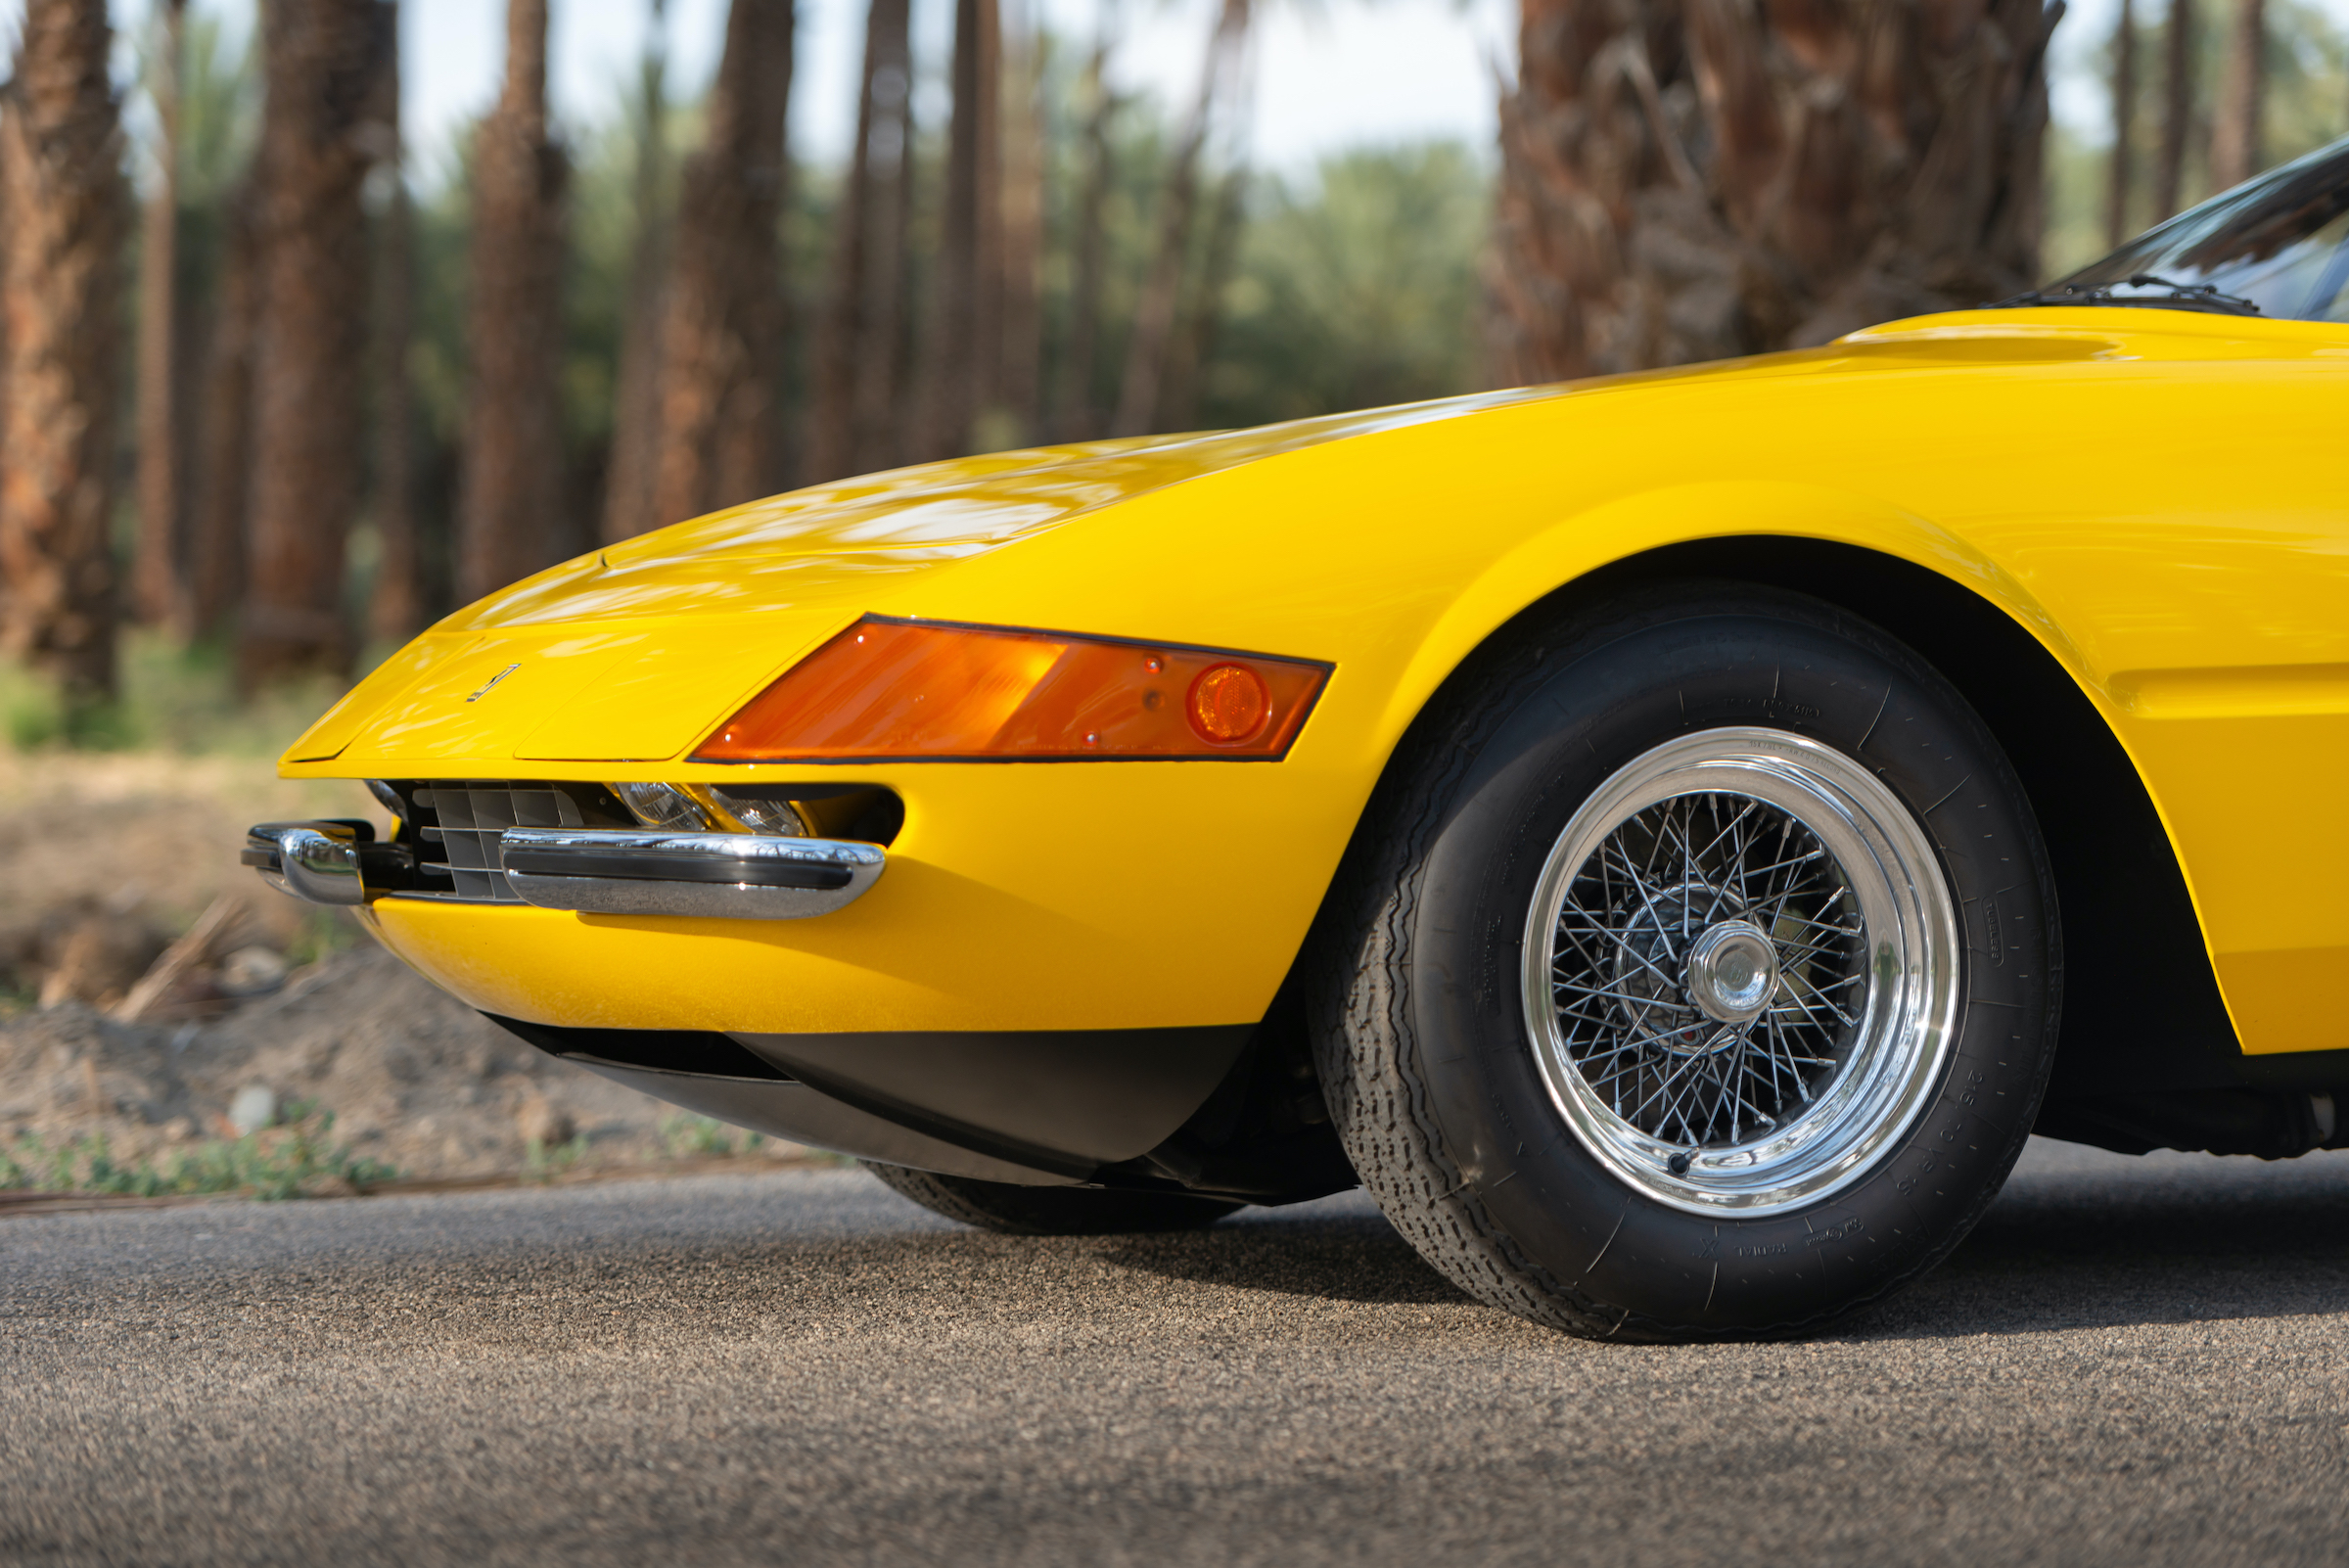 This Ferrari 365 California Spyder Could Fetch $4.5 Million at Auction